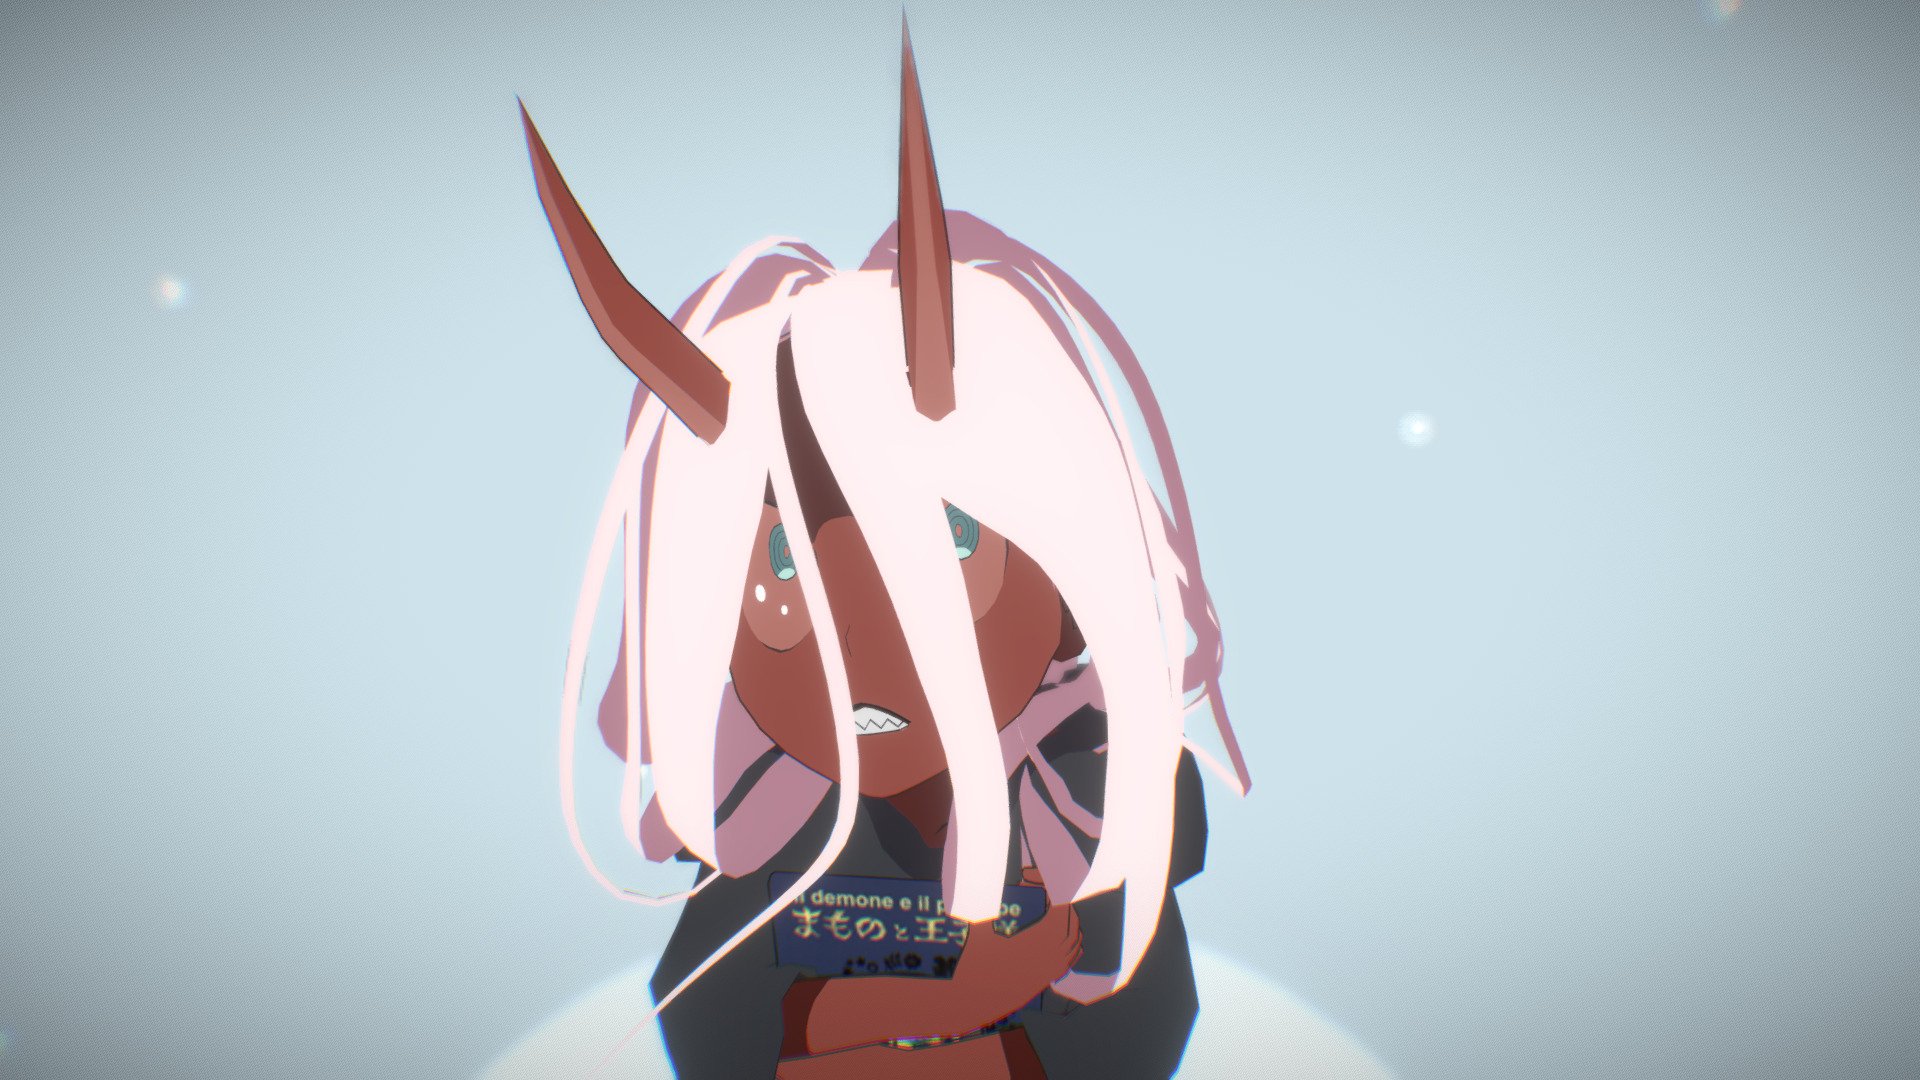 Character in anime darling in the franx name zero two 3D model